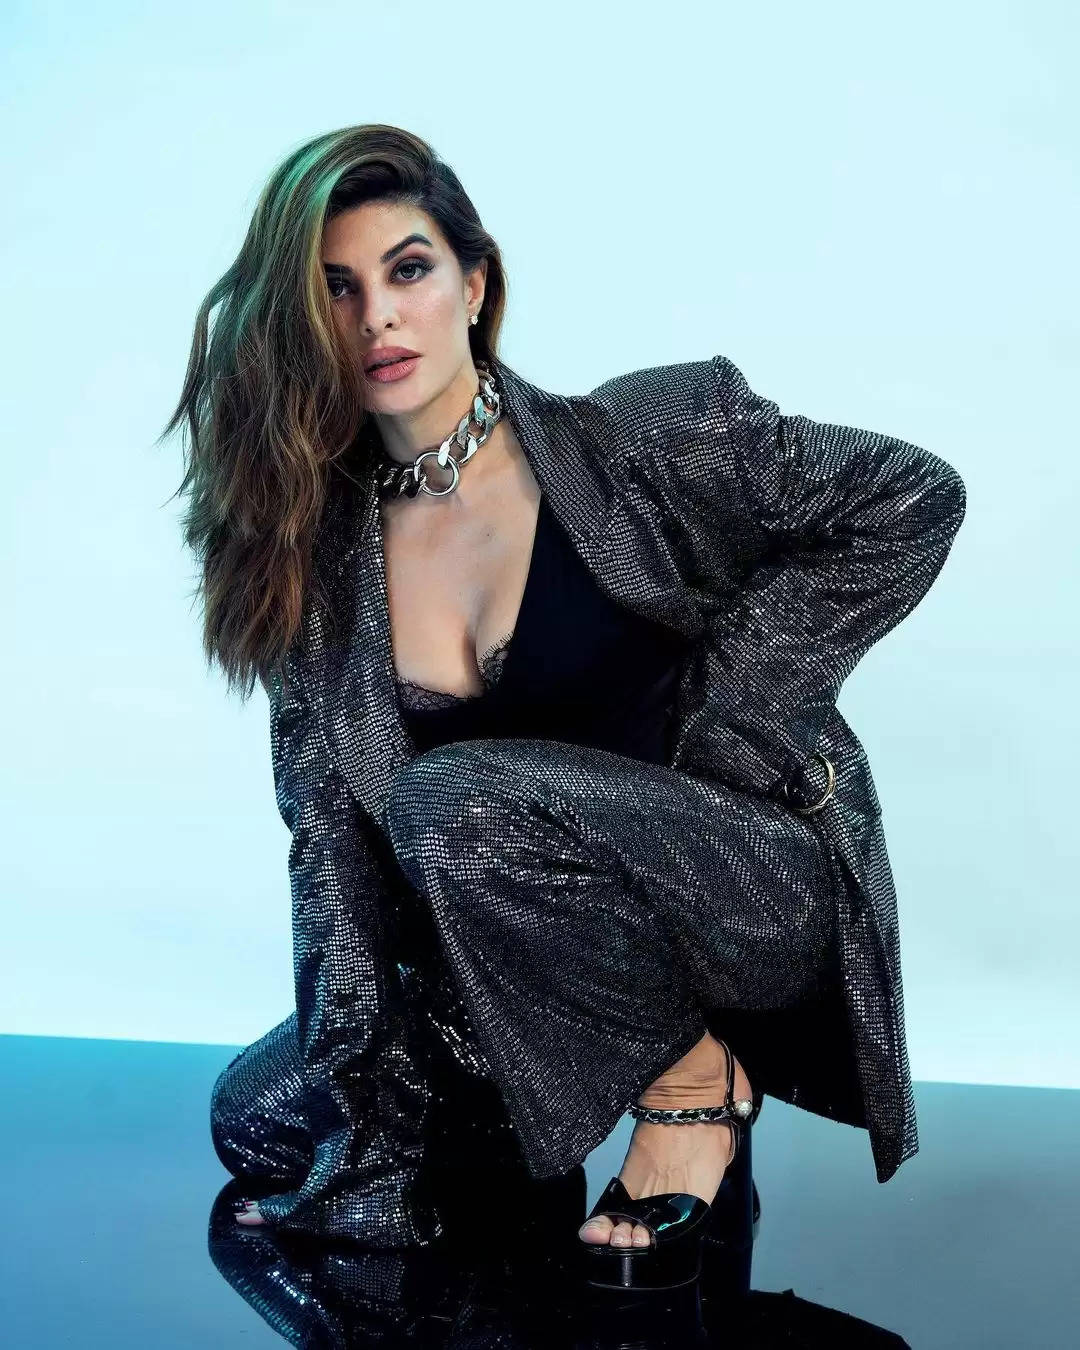 Photos: Jacqueline Fernandez Is A Sight To Behold In Sexy Calendar Photoshoot, See Her Hot Pics